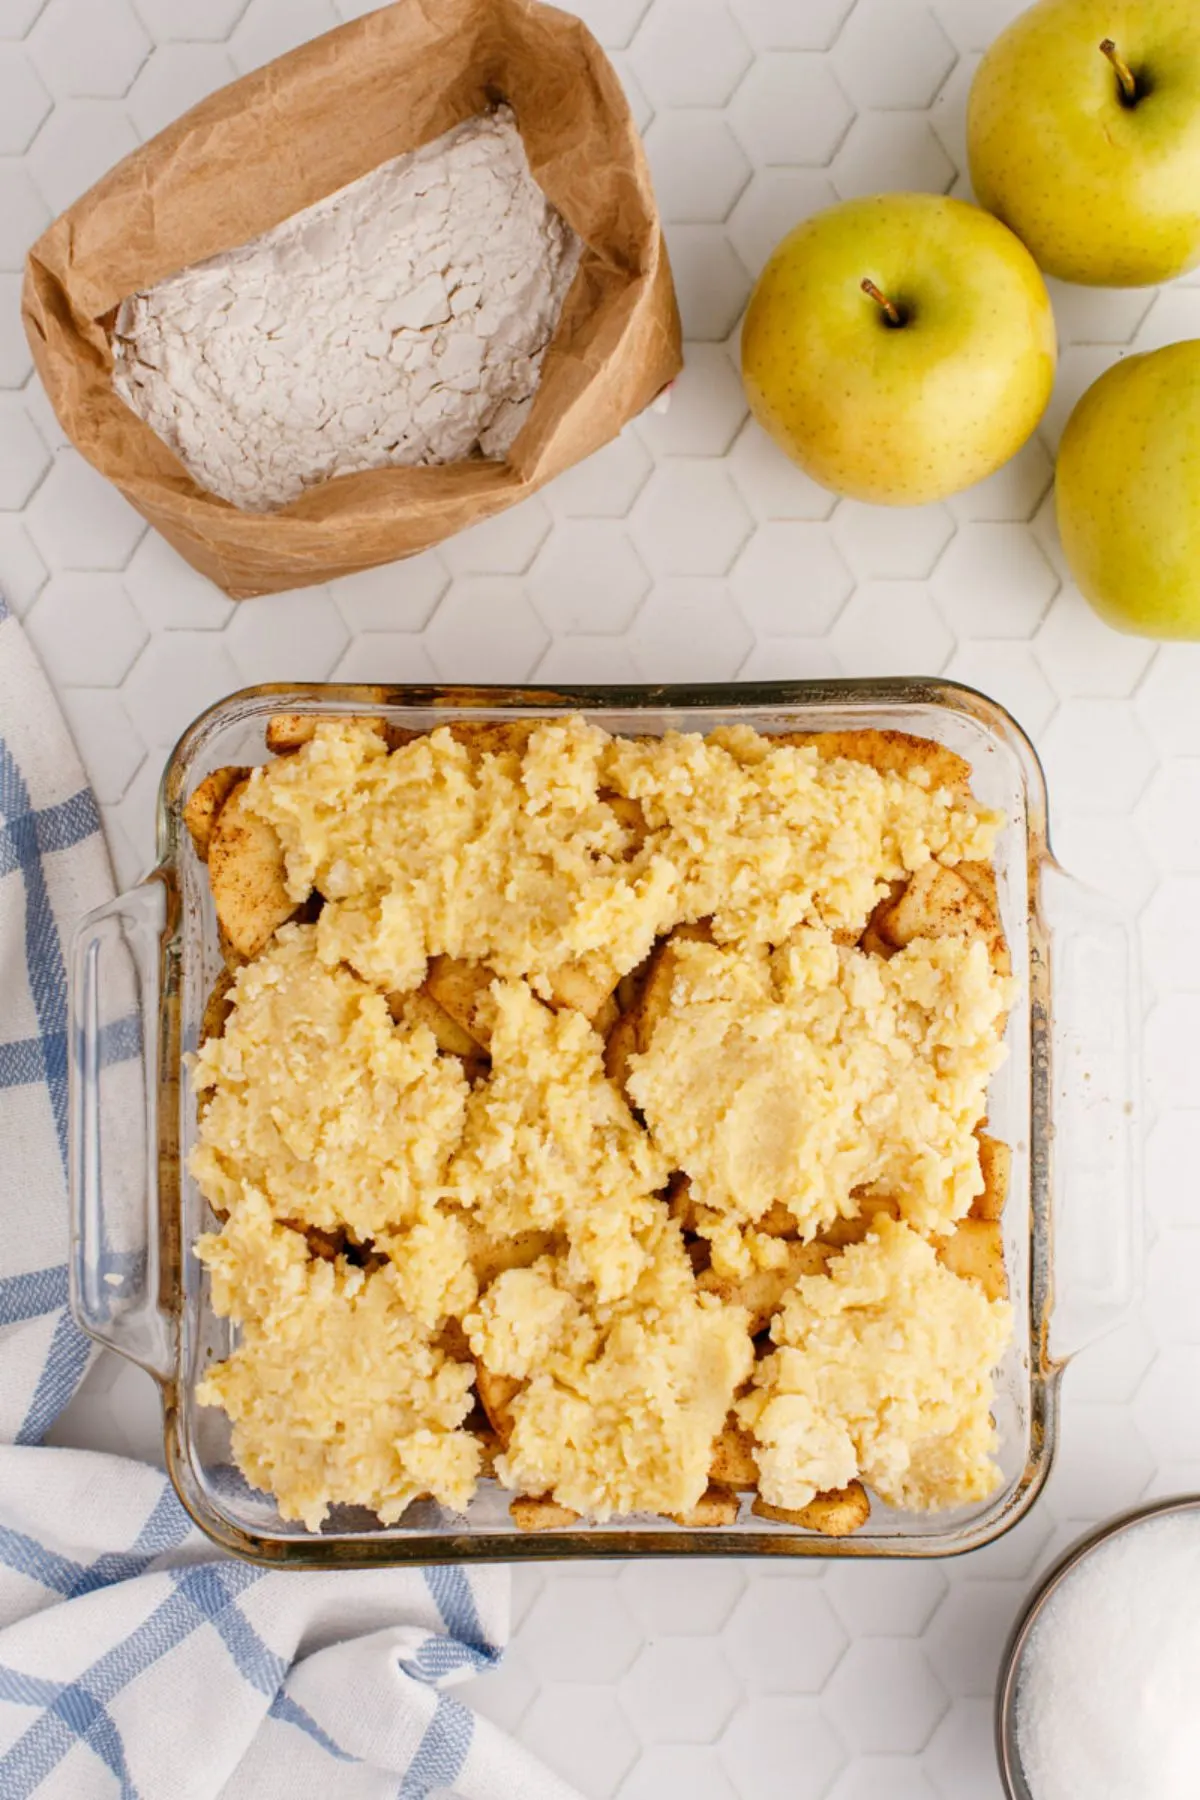 A baked apple cobbler in a baking dish.